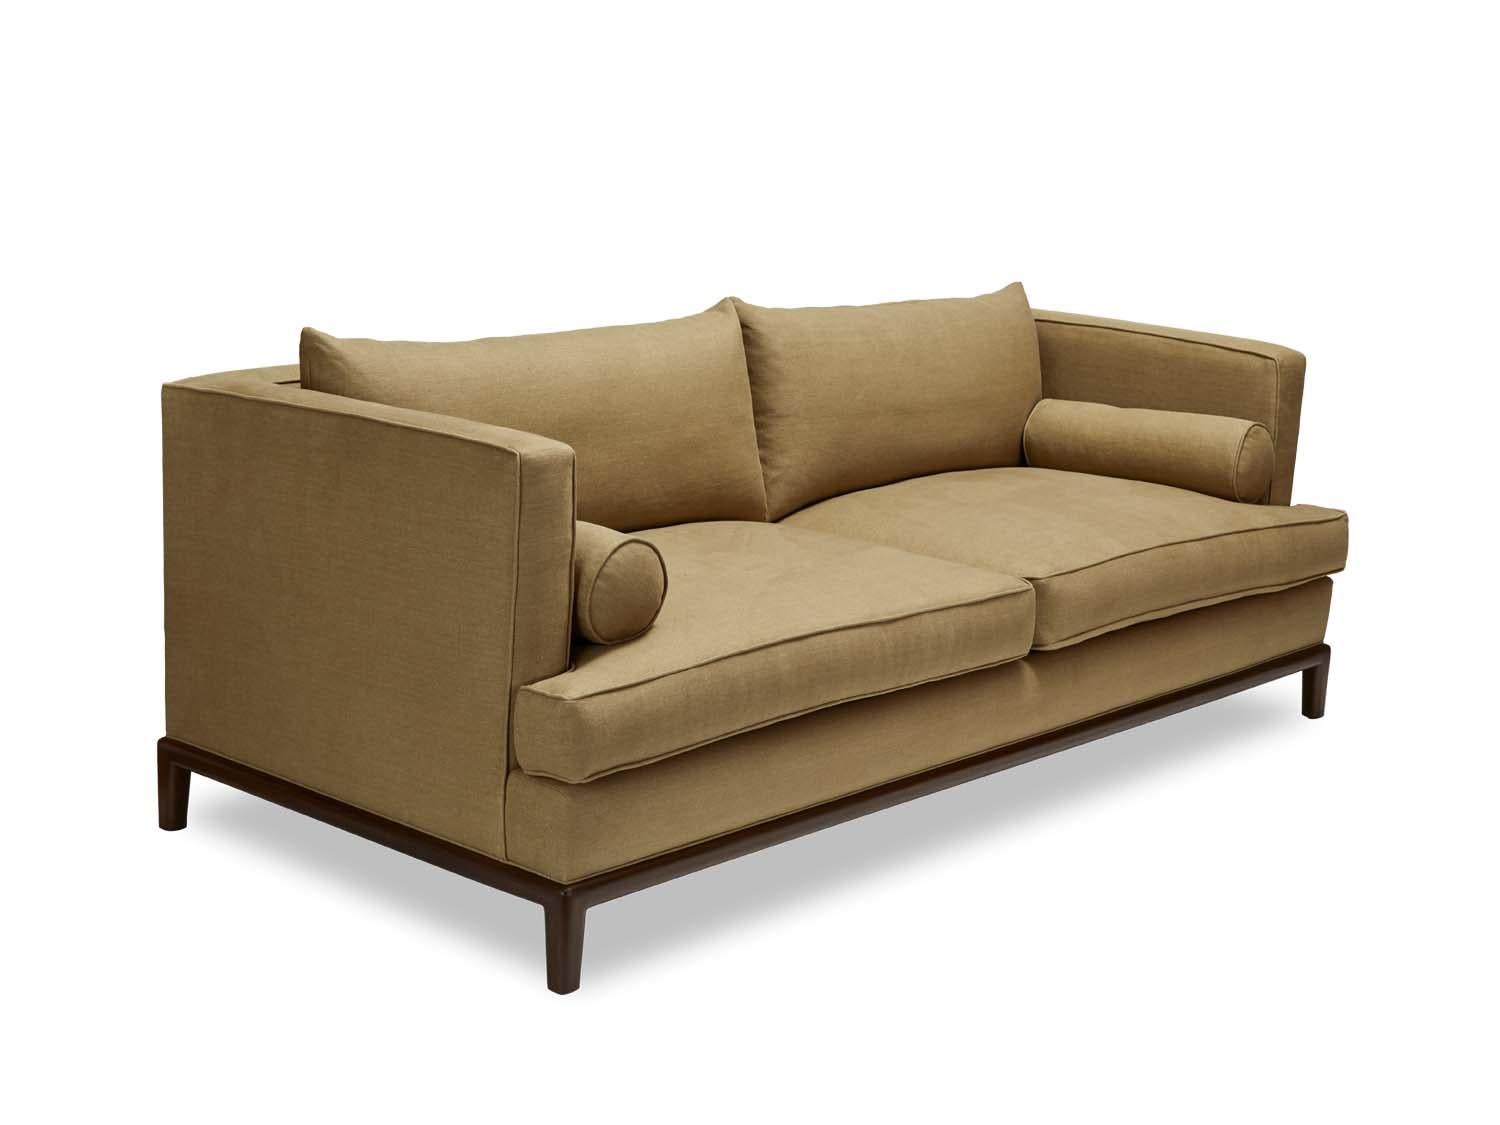 The Franklin sofa is a variation on our Classic Montebello sofa style. It features two down-wrapped seat and back cushions and two bolster pillows.

The Lawson-Fenning Collection is designed and handmade in Los Angeles, California.
Reach out to